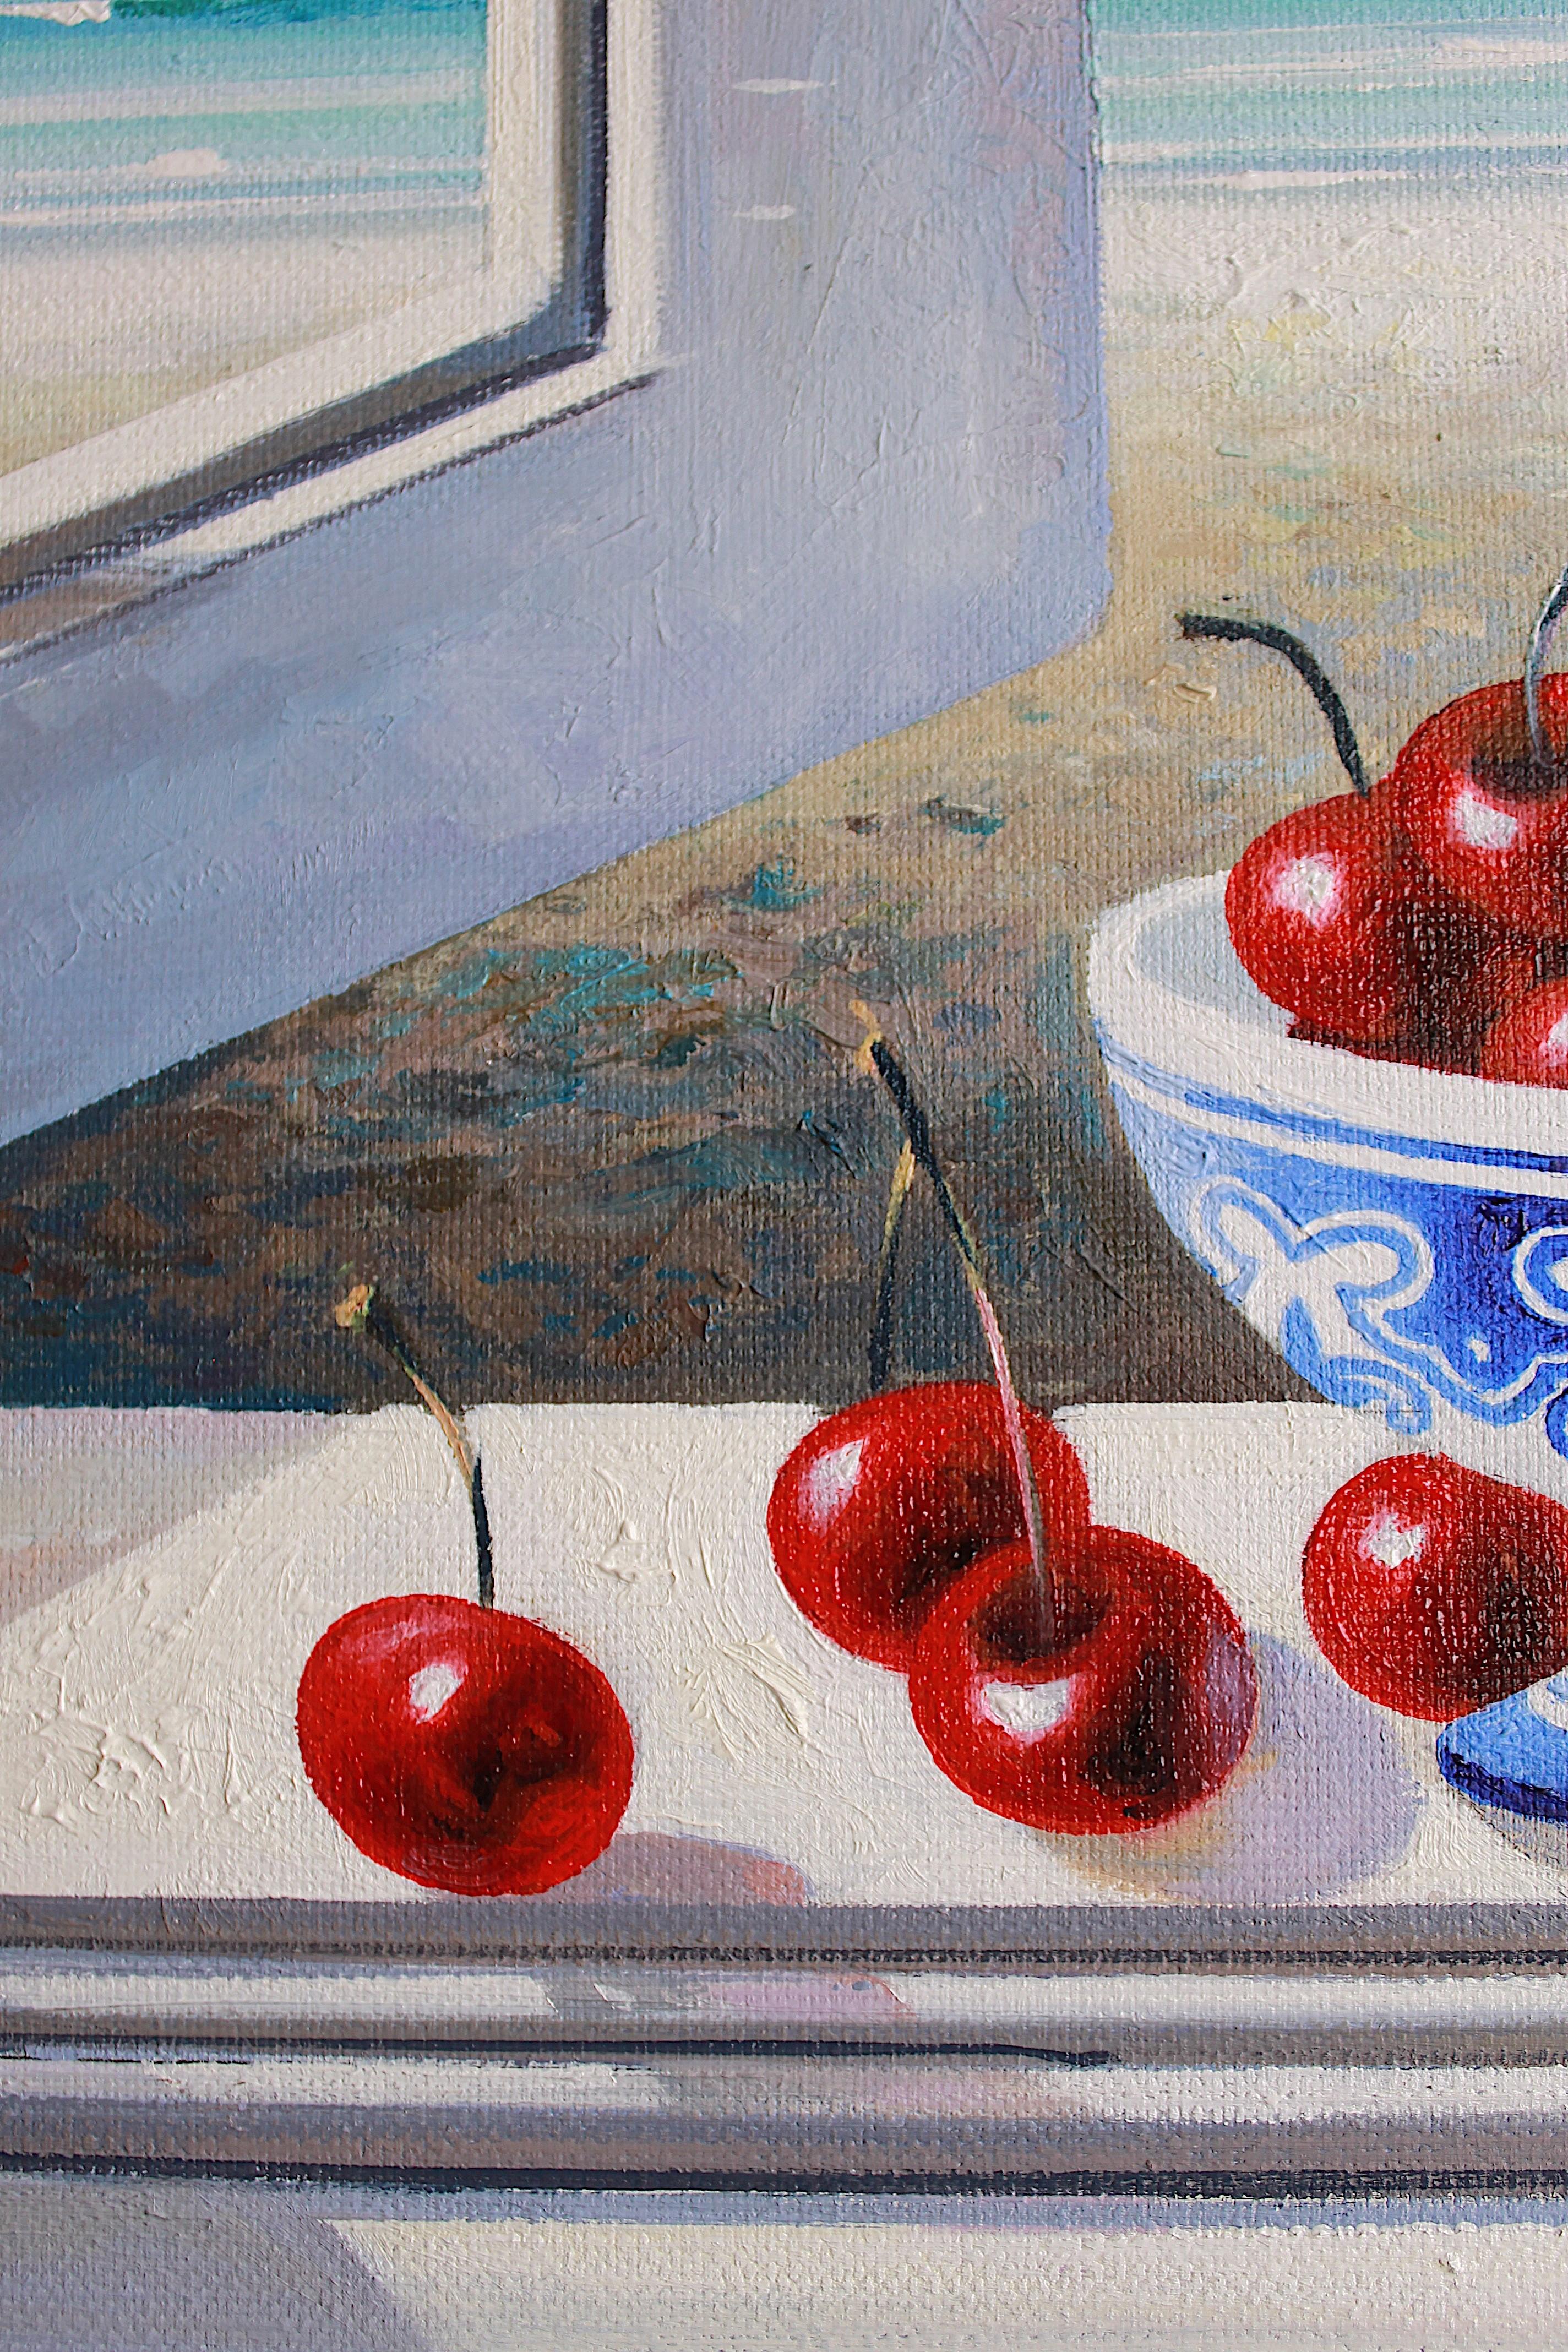 Cherries on the window - Original oil painting - Contemporary art - Painting by Luis Fuentes